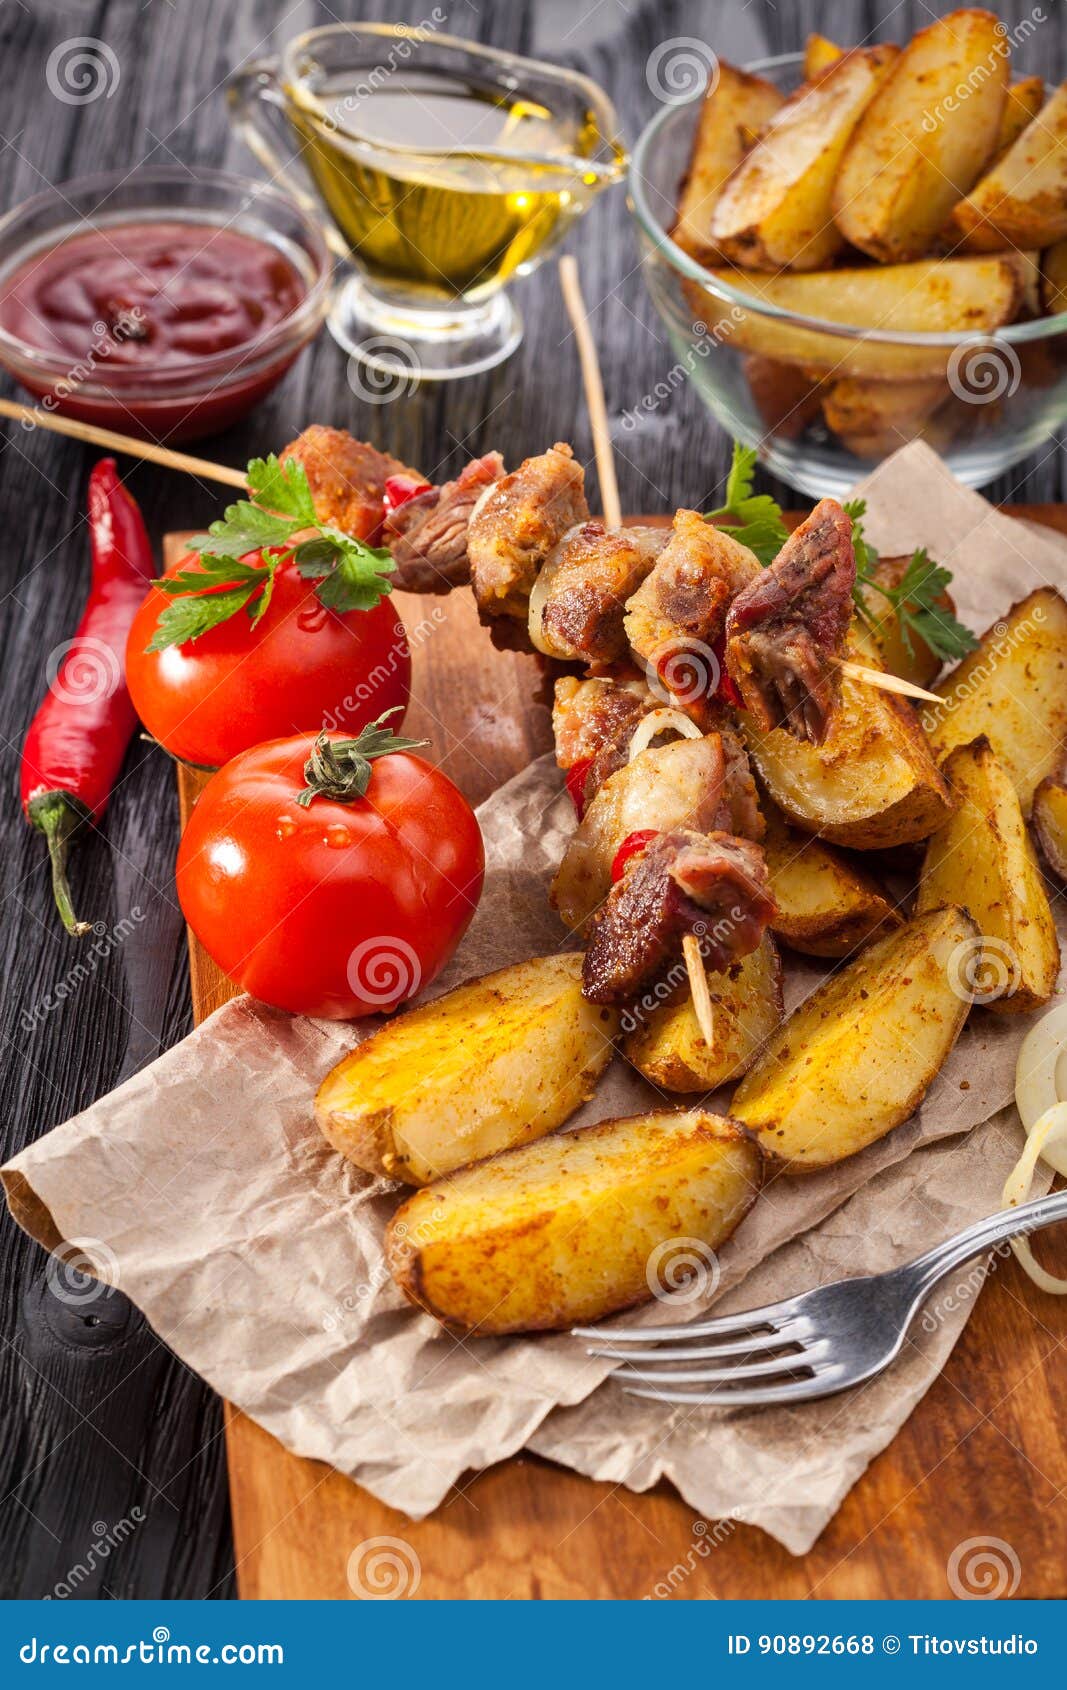 Meat Skewer with Herbs with Onions, Baked Potatoes, Tomatoes and Greens ...